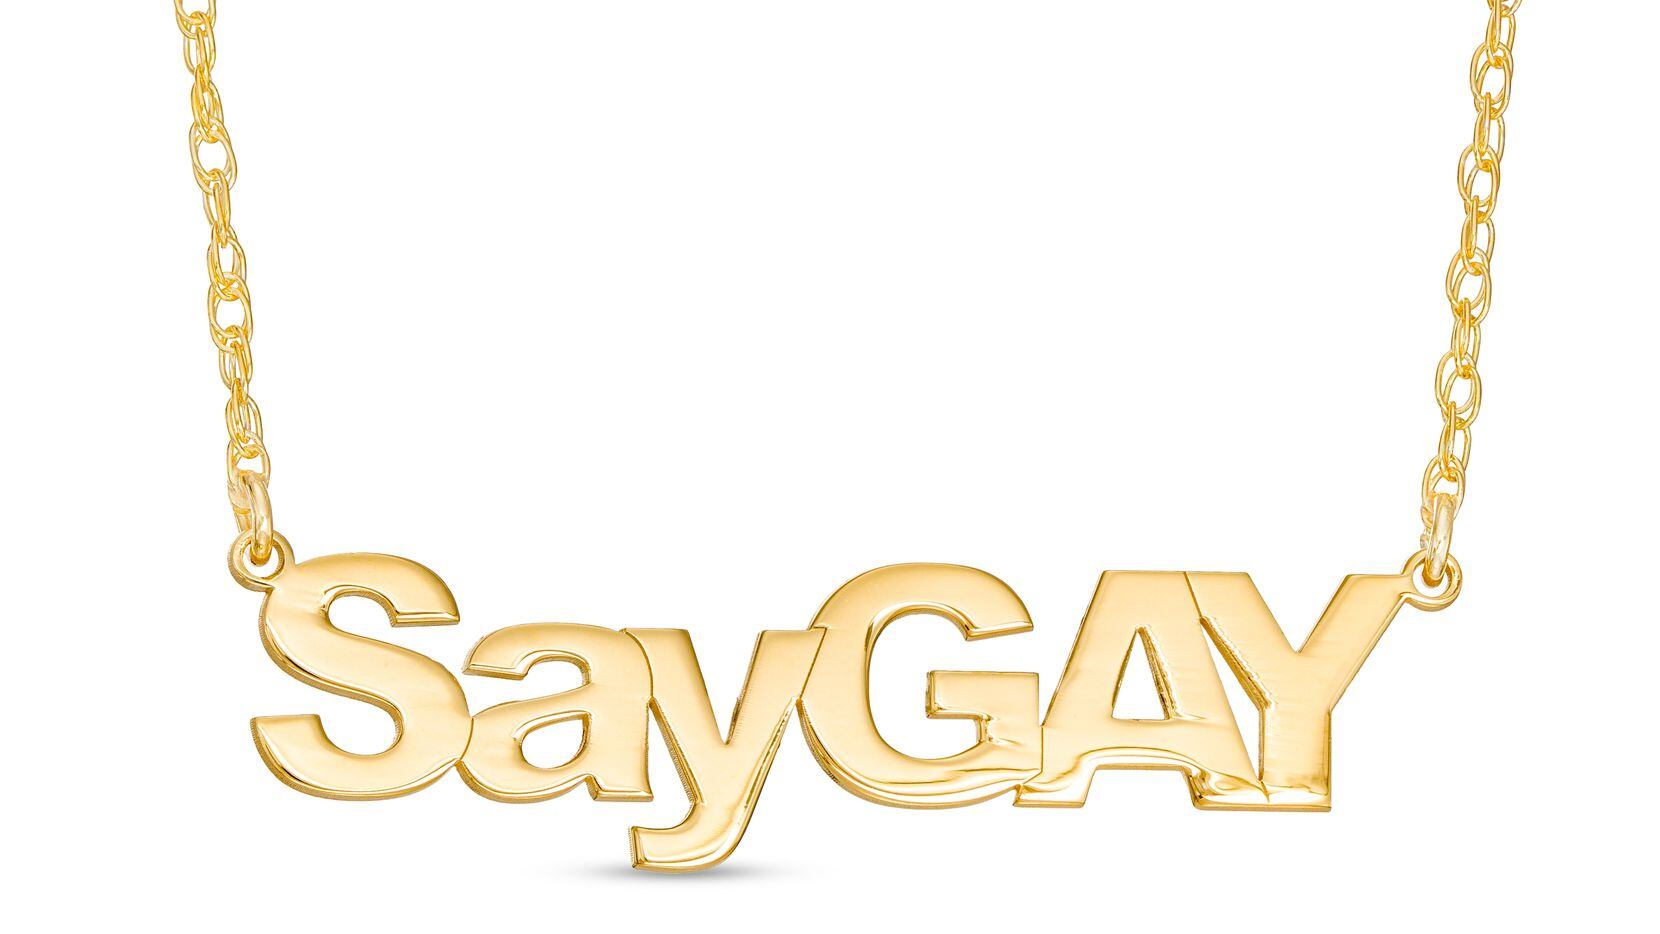 Banter by Piercing Pagoda will begin selling a "SayGAY" plated necklace on June 1.